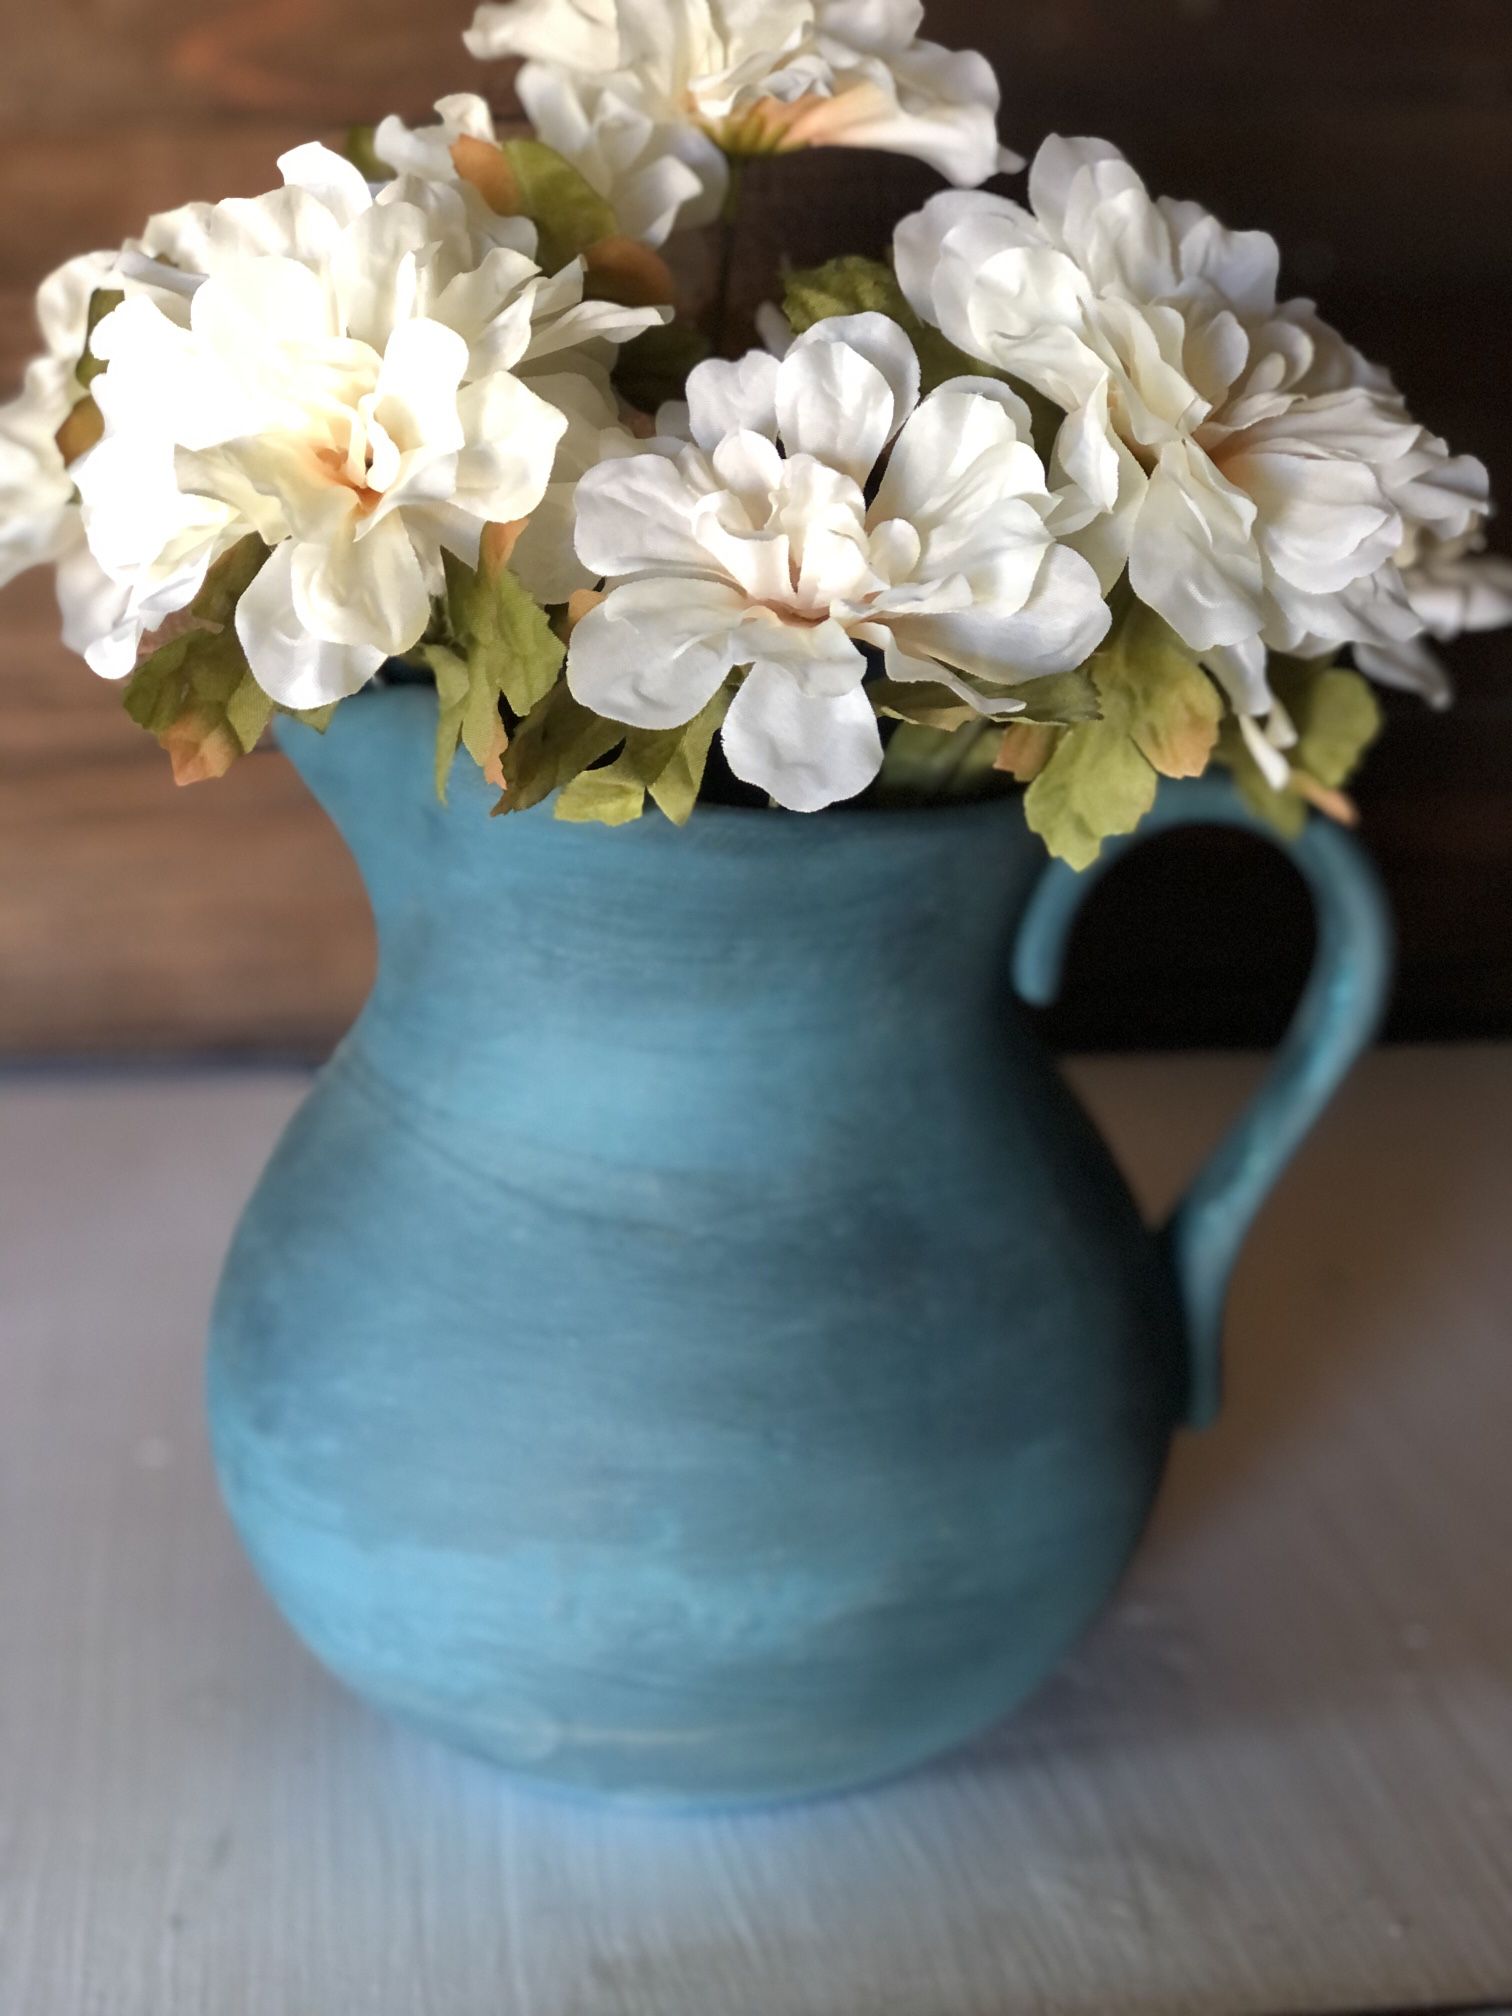 Teal Vintage Water Pitcher Vase With Faux Flowers